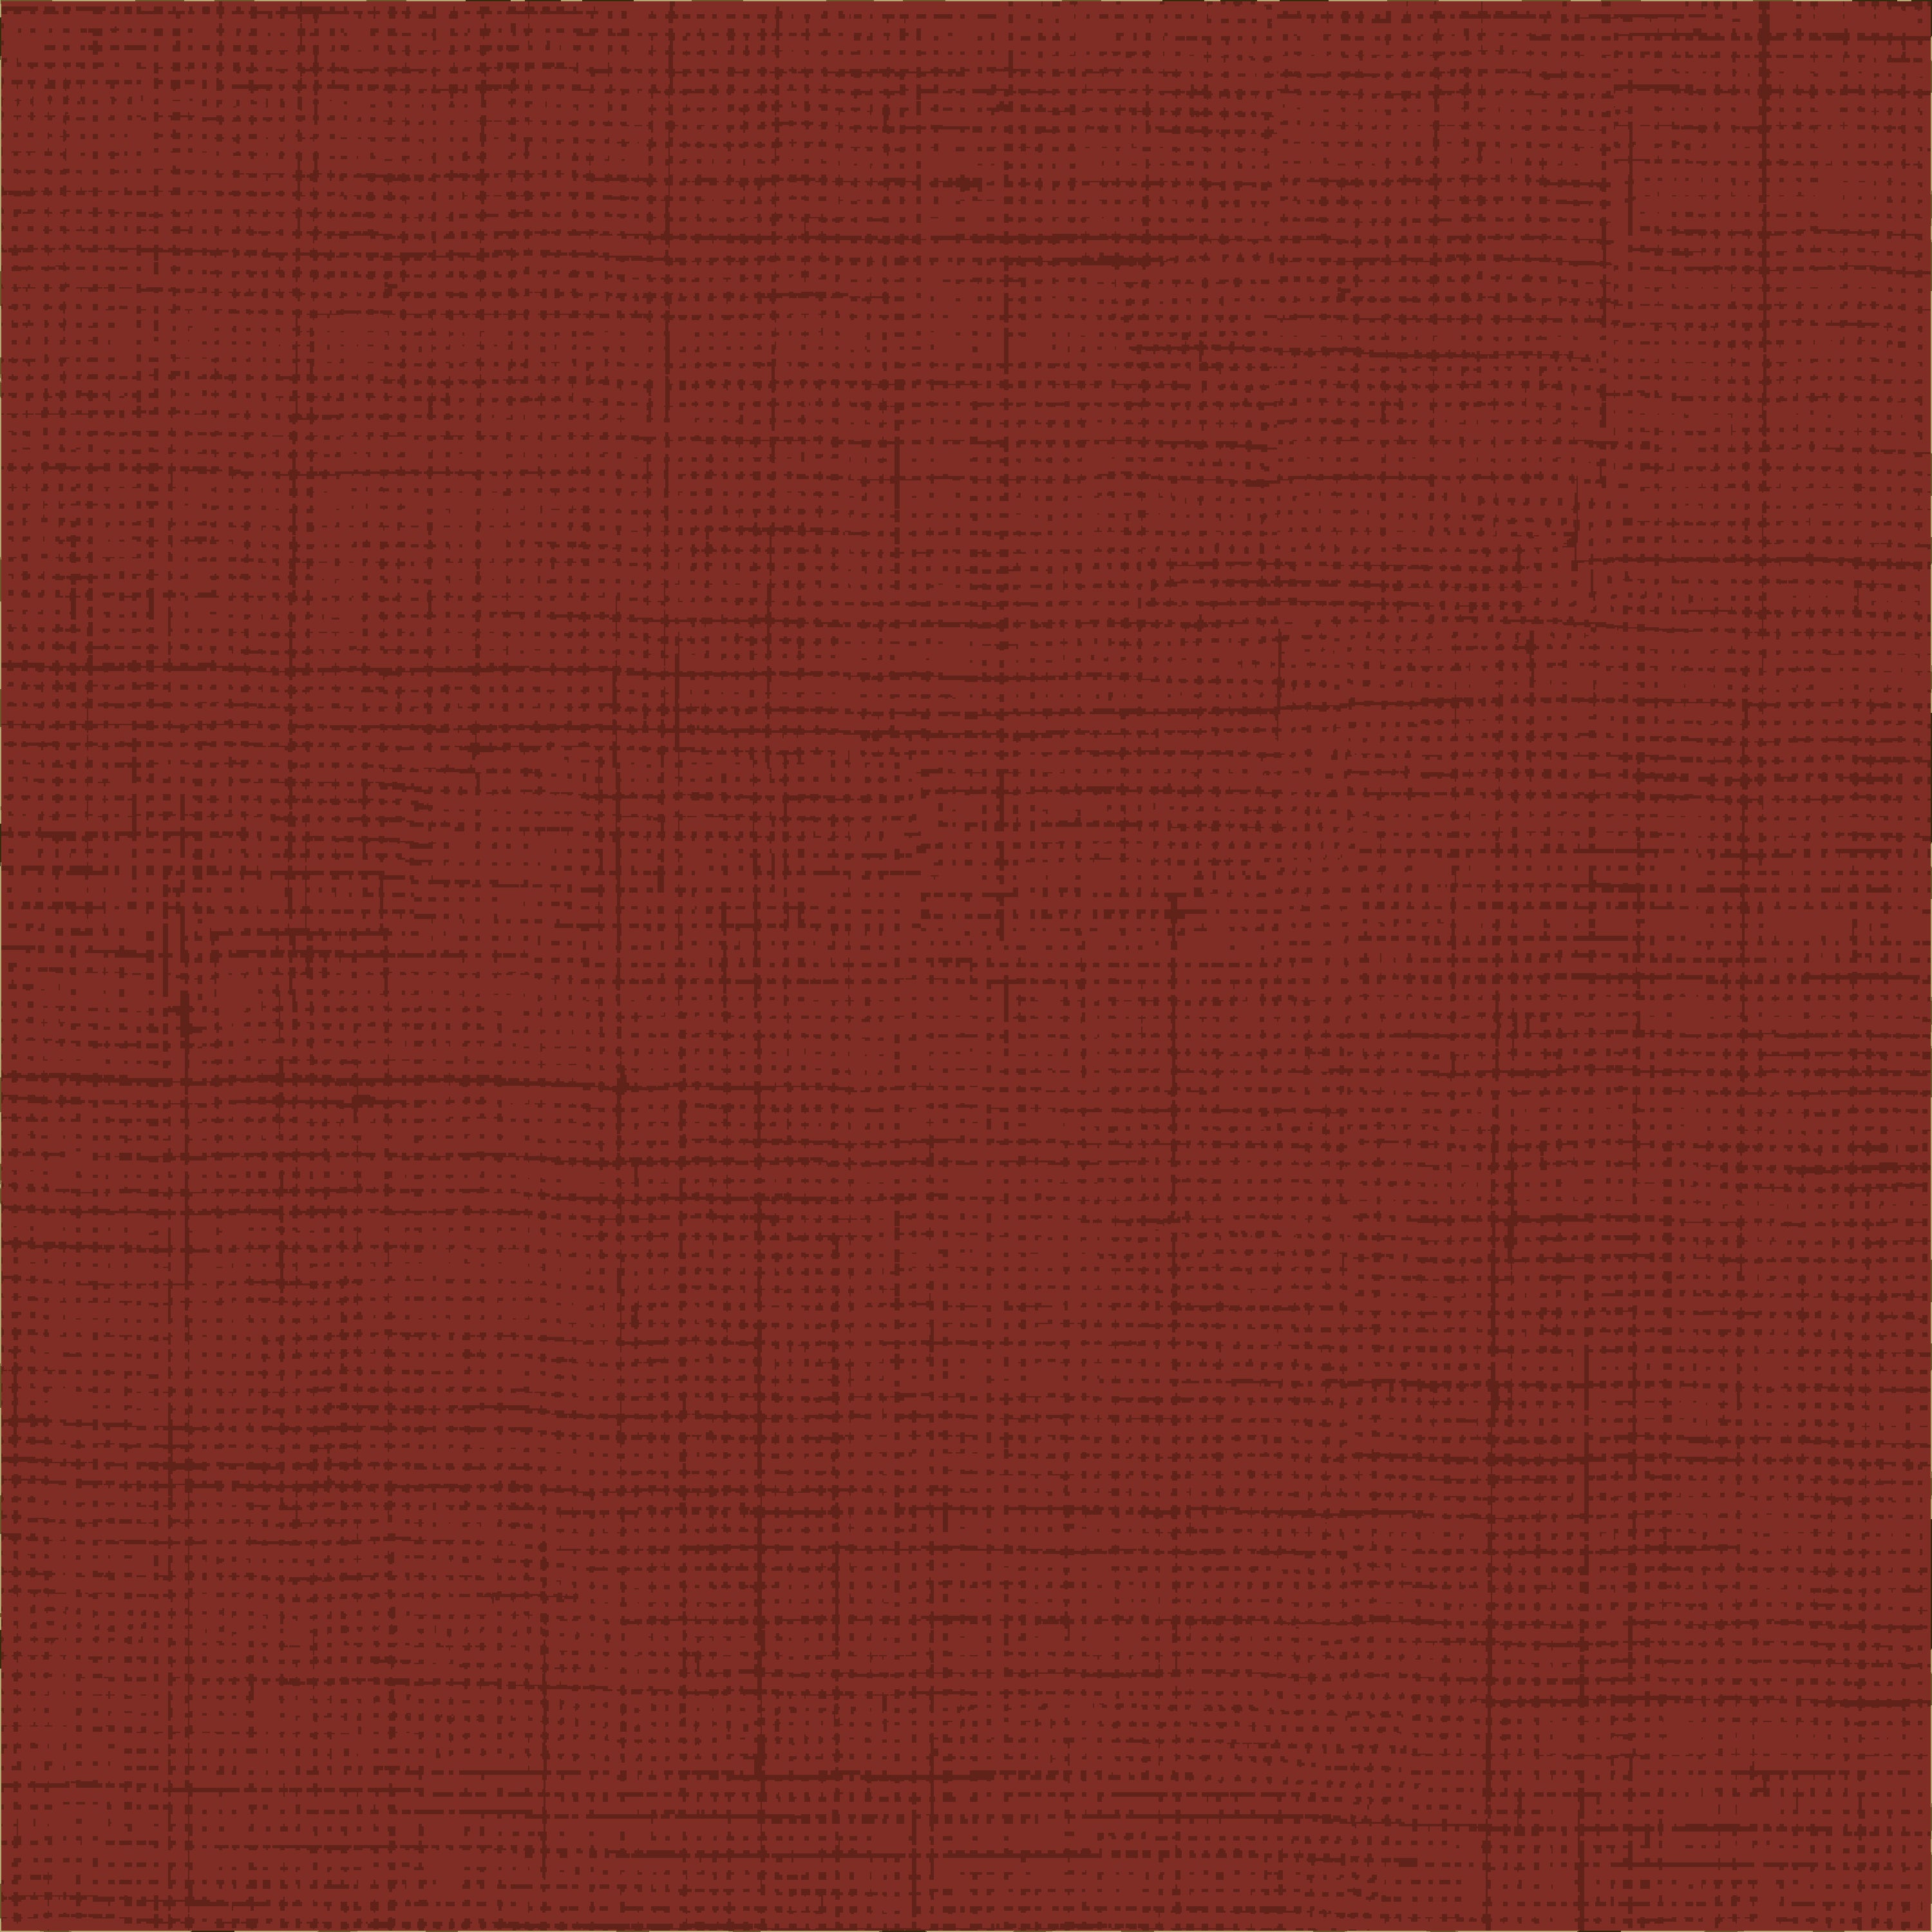 Waverly Inspirations 100% Duck Cotton 54" Texture Ruby Color Sewing Fabric Quilt Crafts by the Yard